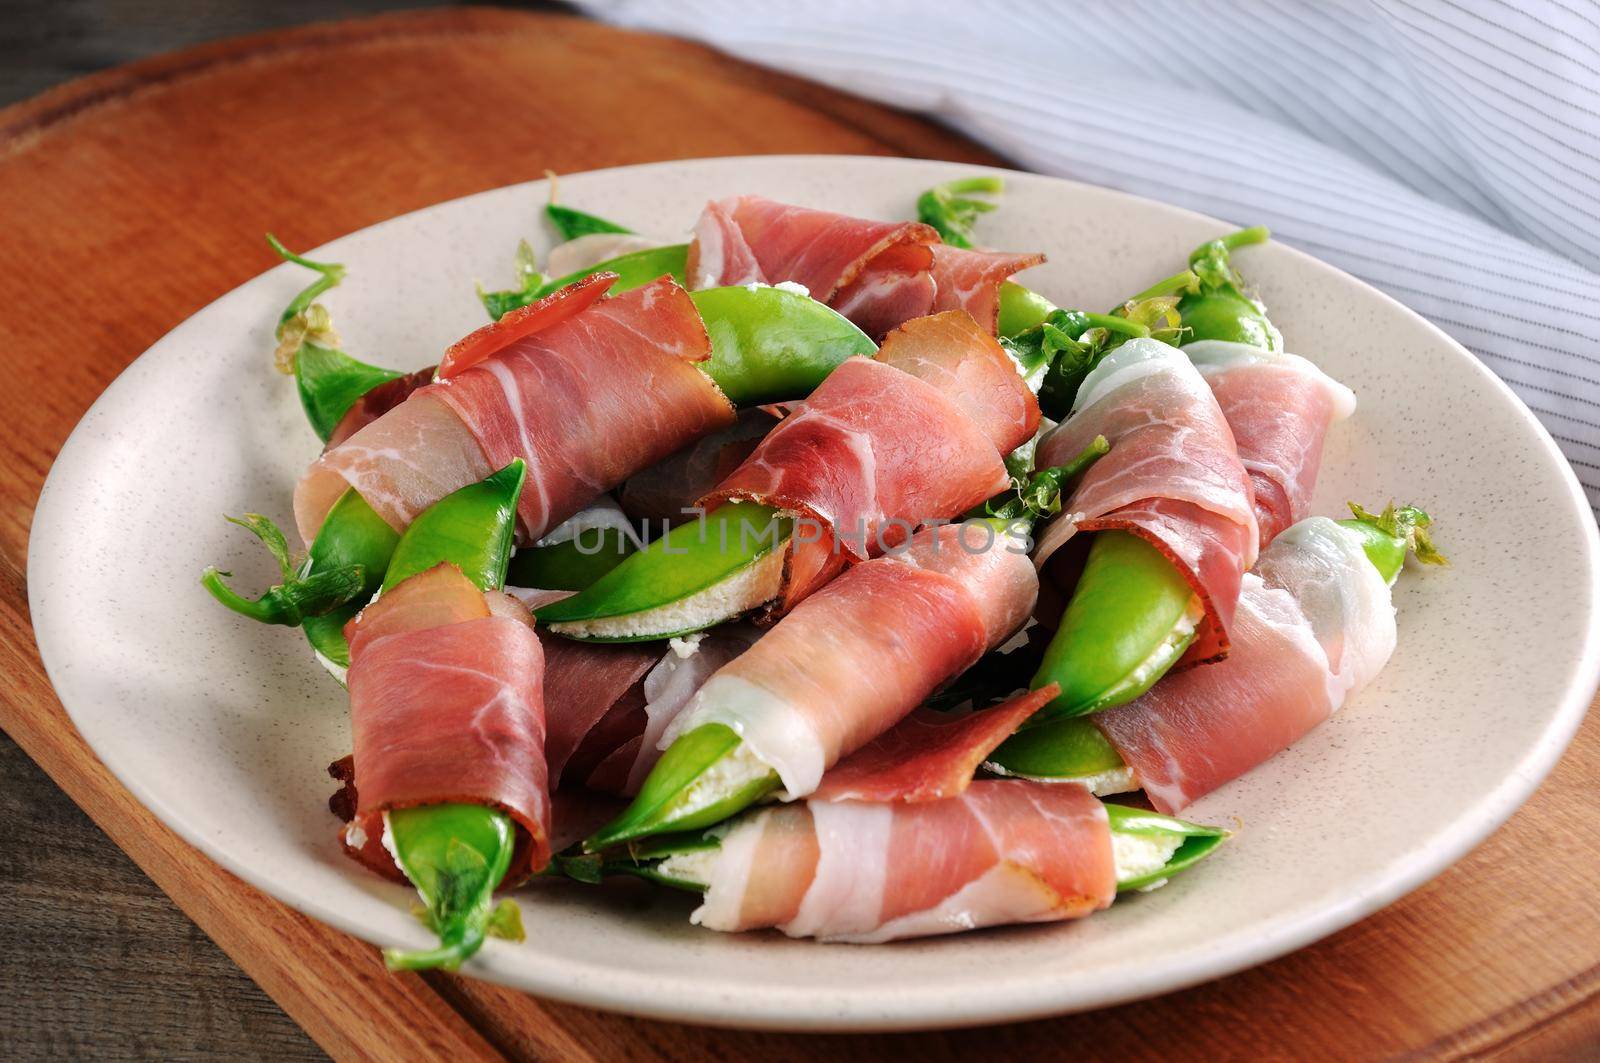 Snack of peas and ham by Apolonia